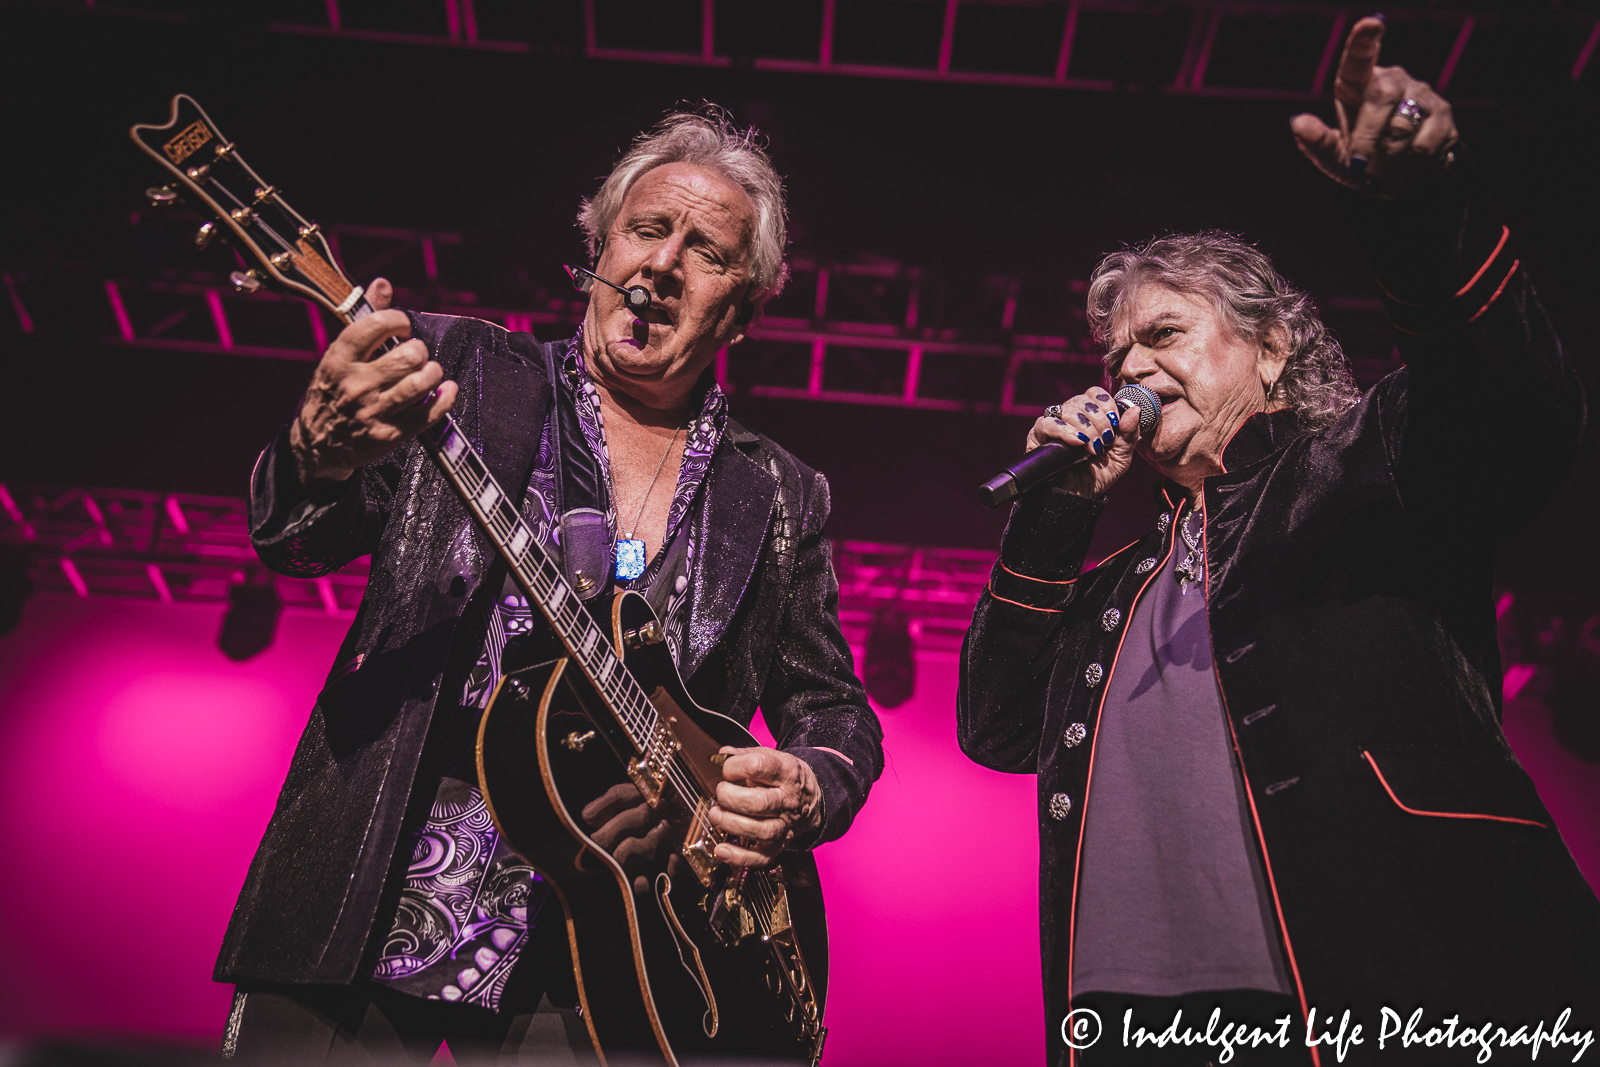 Graham Russell and Russell Hitchcock of soft rock duo Air Supply performing "Even the Nights Are Better" at Star Pavilion inside of Ameristar Casino in Kansas City, MO on May 5, 2023.